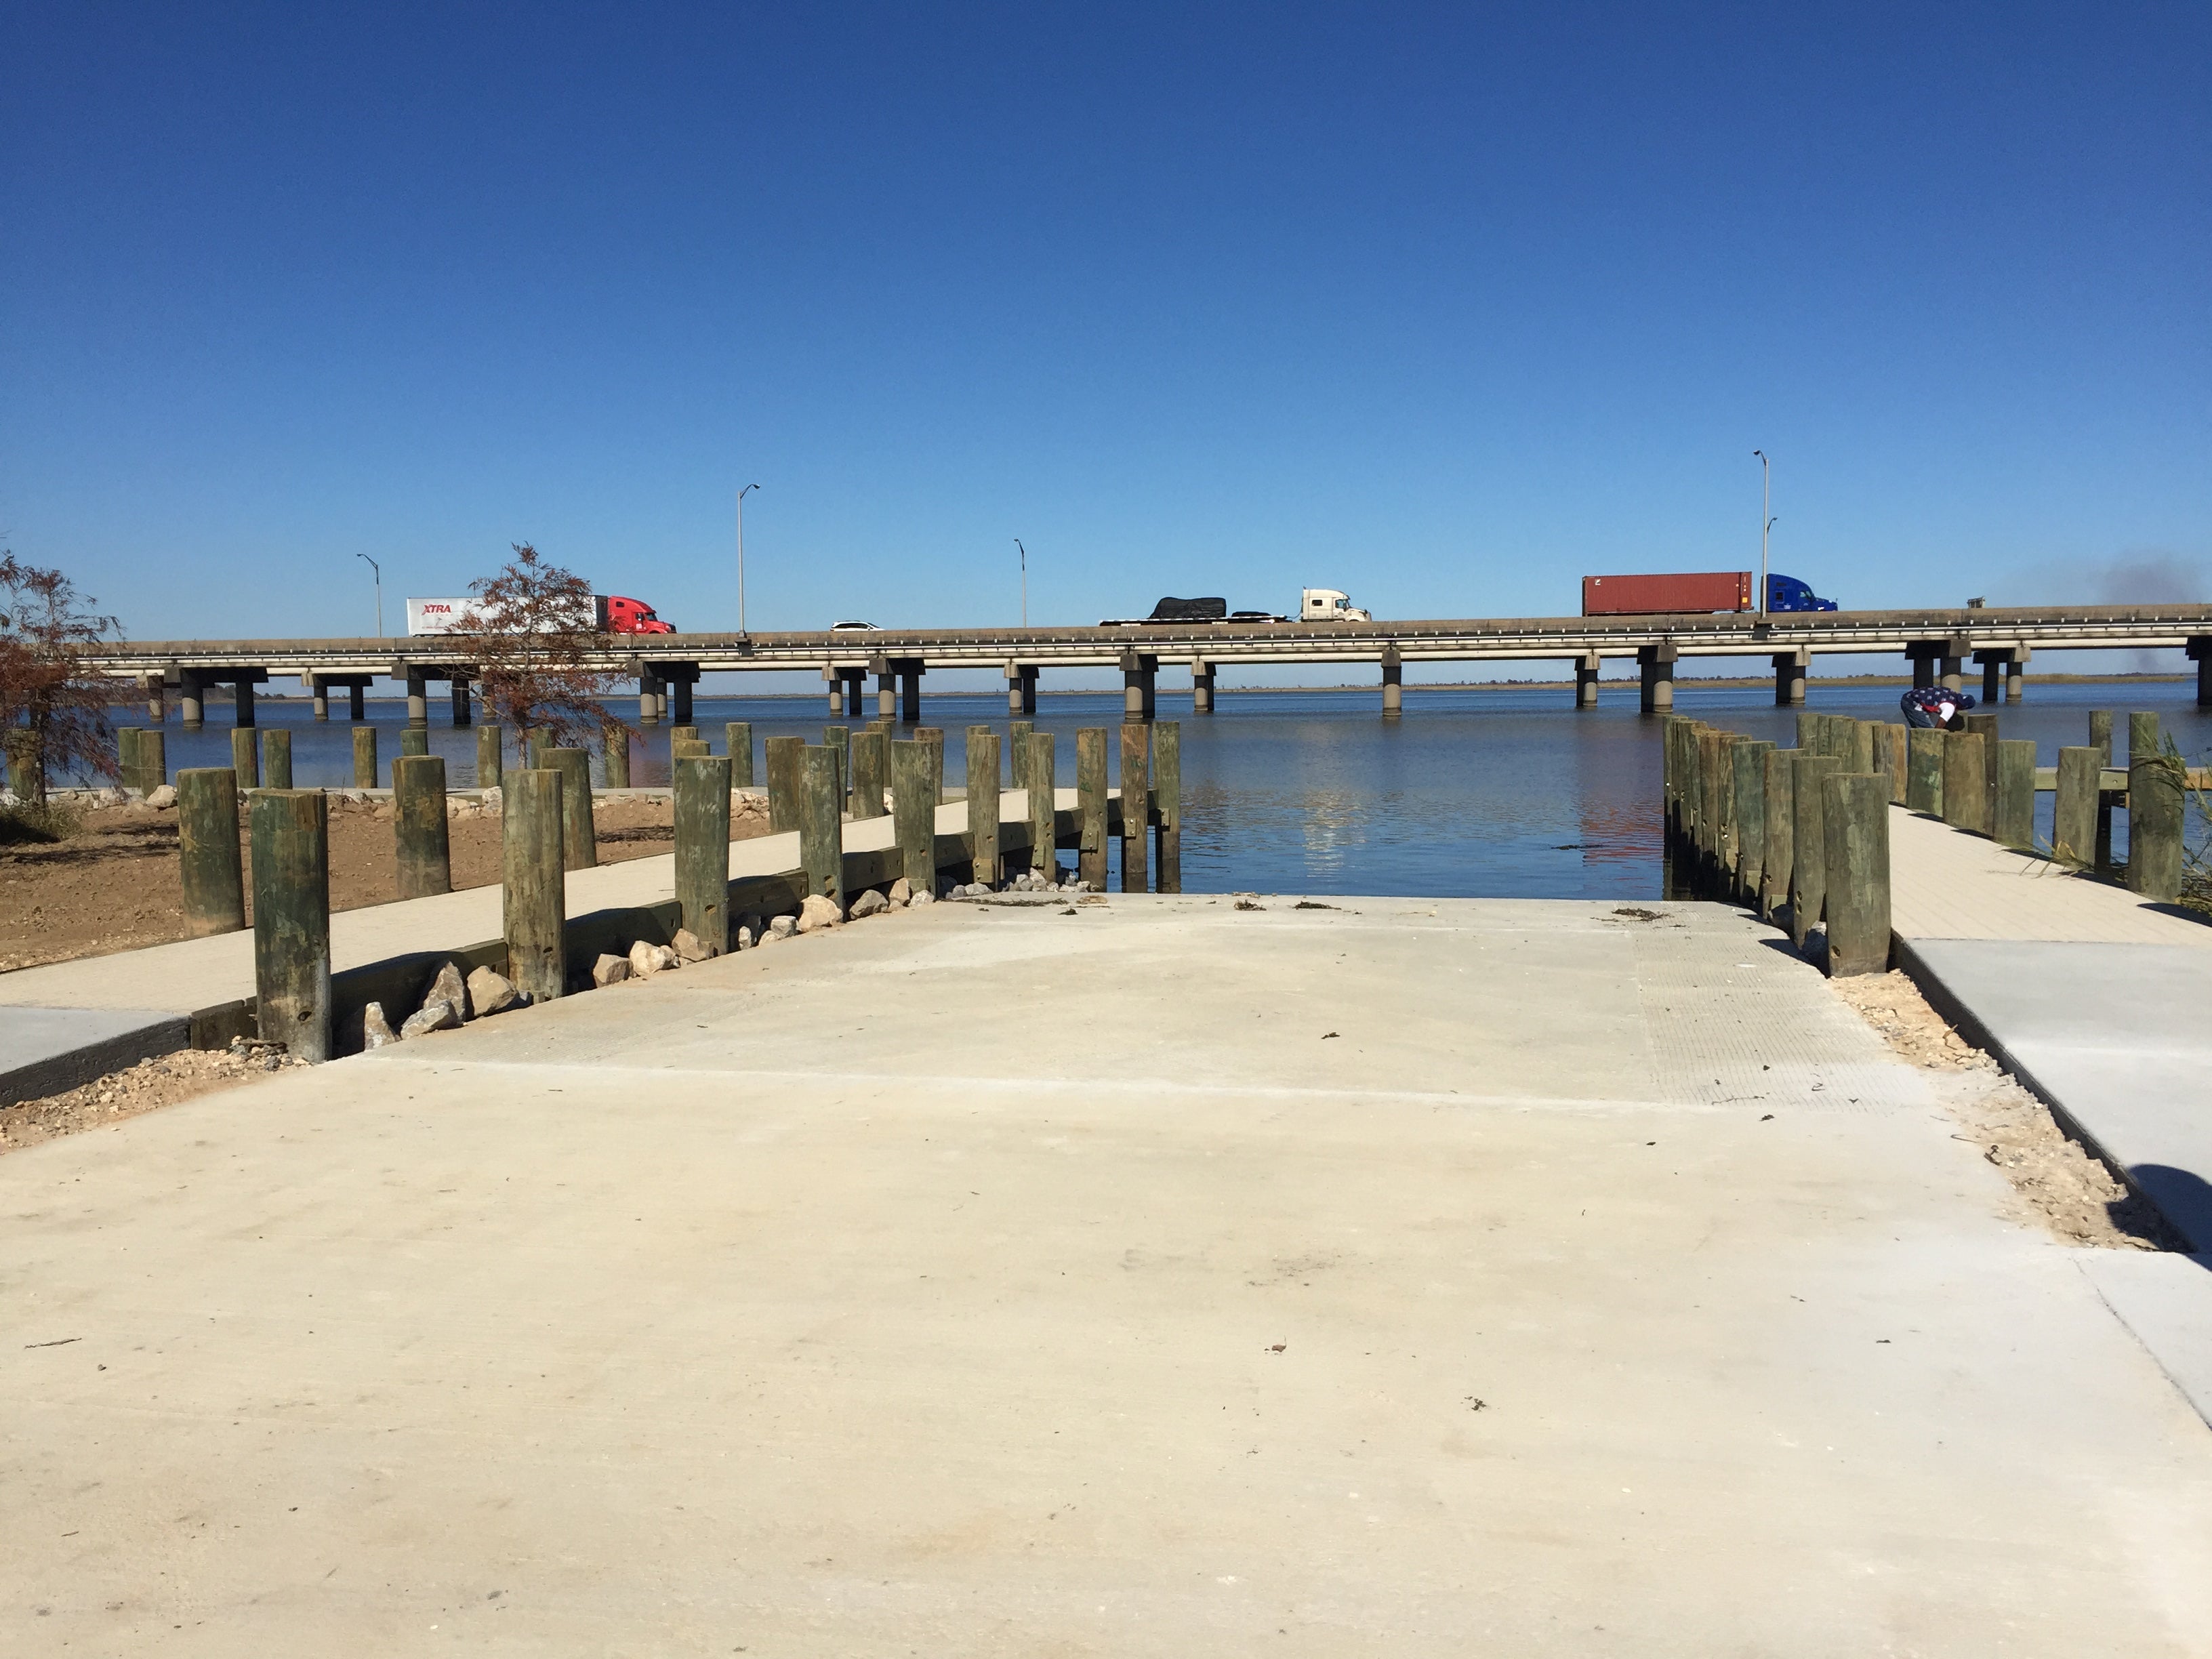 The boat ramp is located directly across from the USS Alabama Battleship Memorial Park.